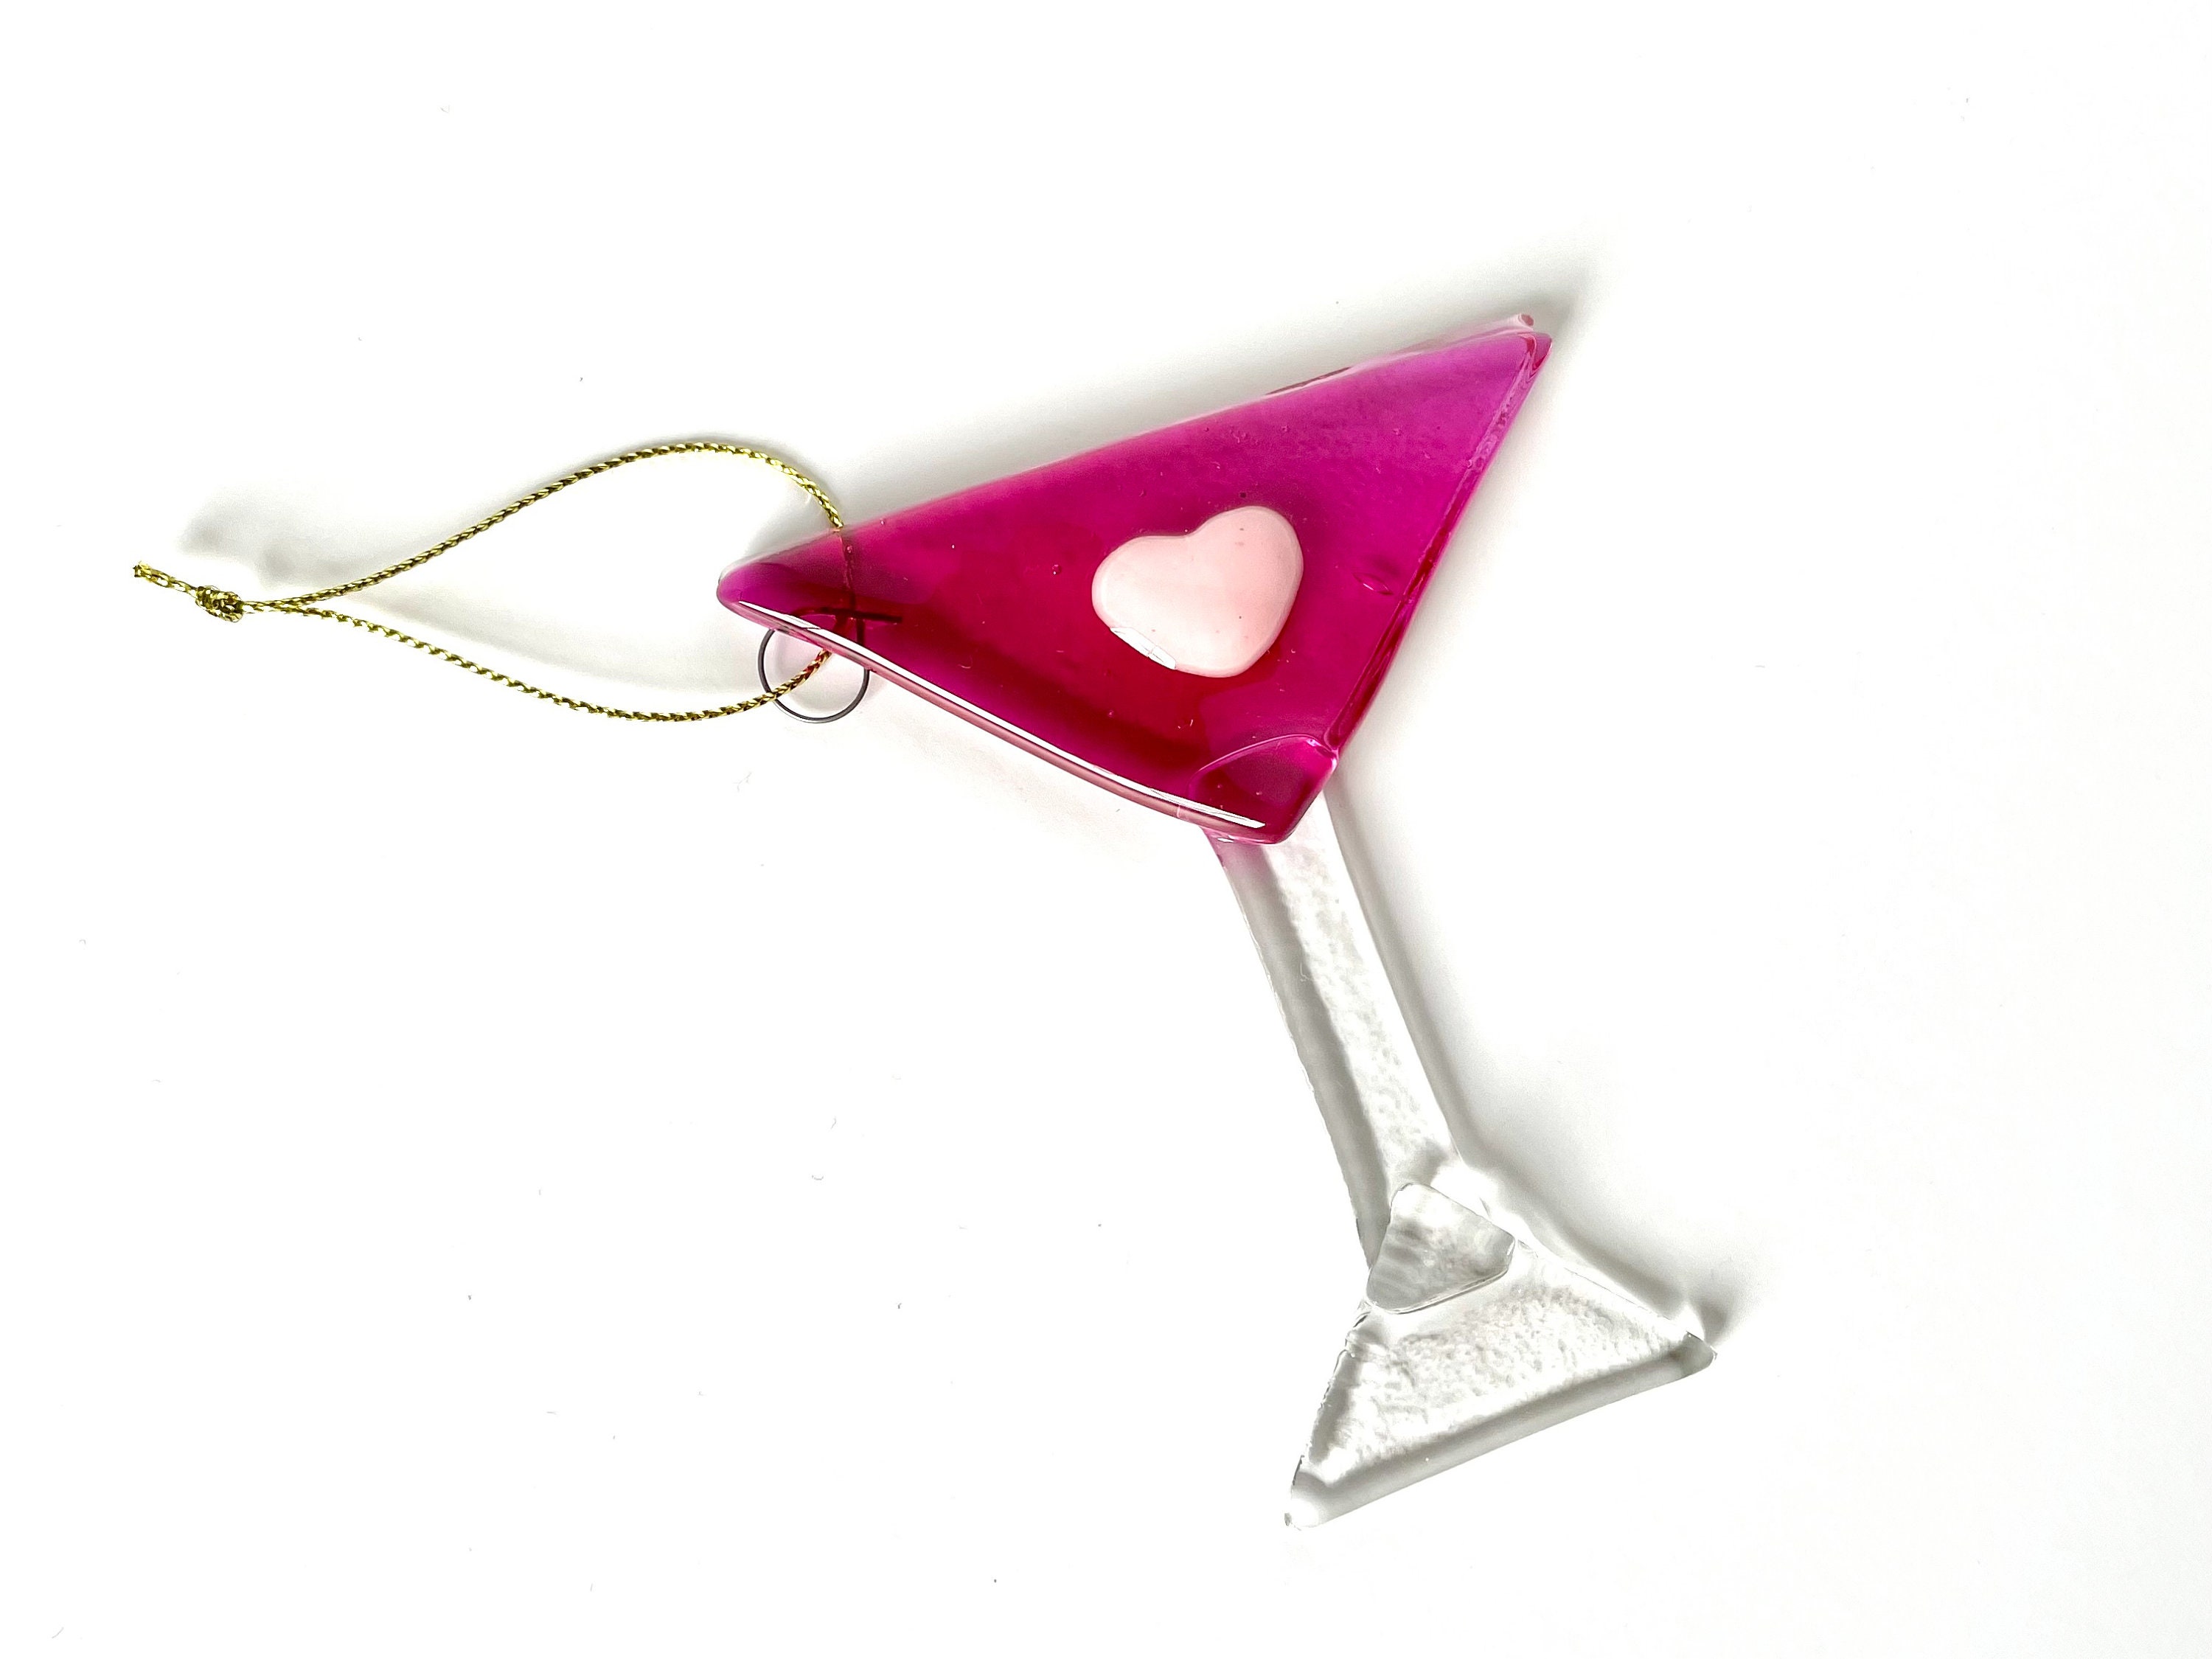 BestAlice 2 Pcs Cocktail Glass Martini Glasses, 8 Oz Creative Heart Shaped  Cocktail Glasses With Str…See more BestAlice 2 Pcs Cocktail Glass Martini